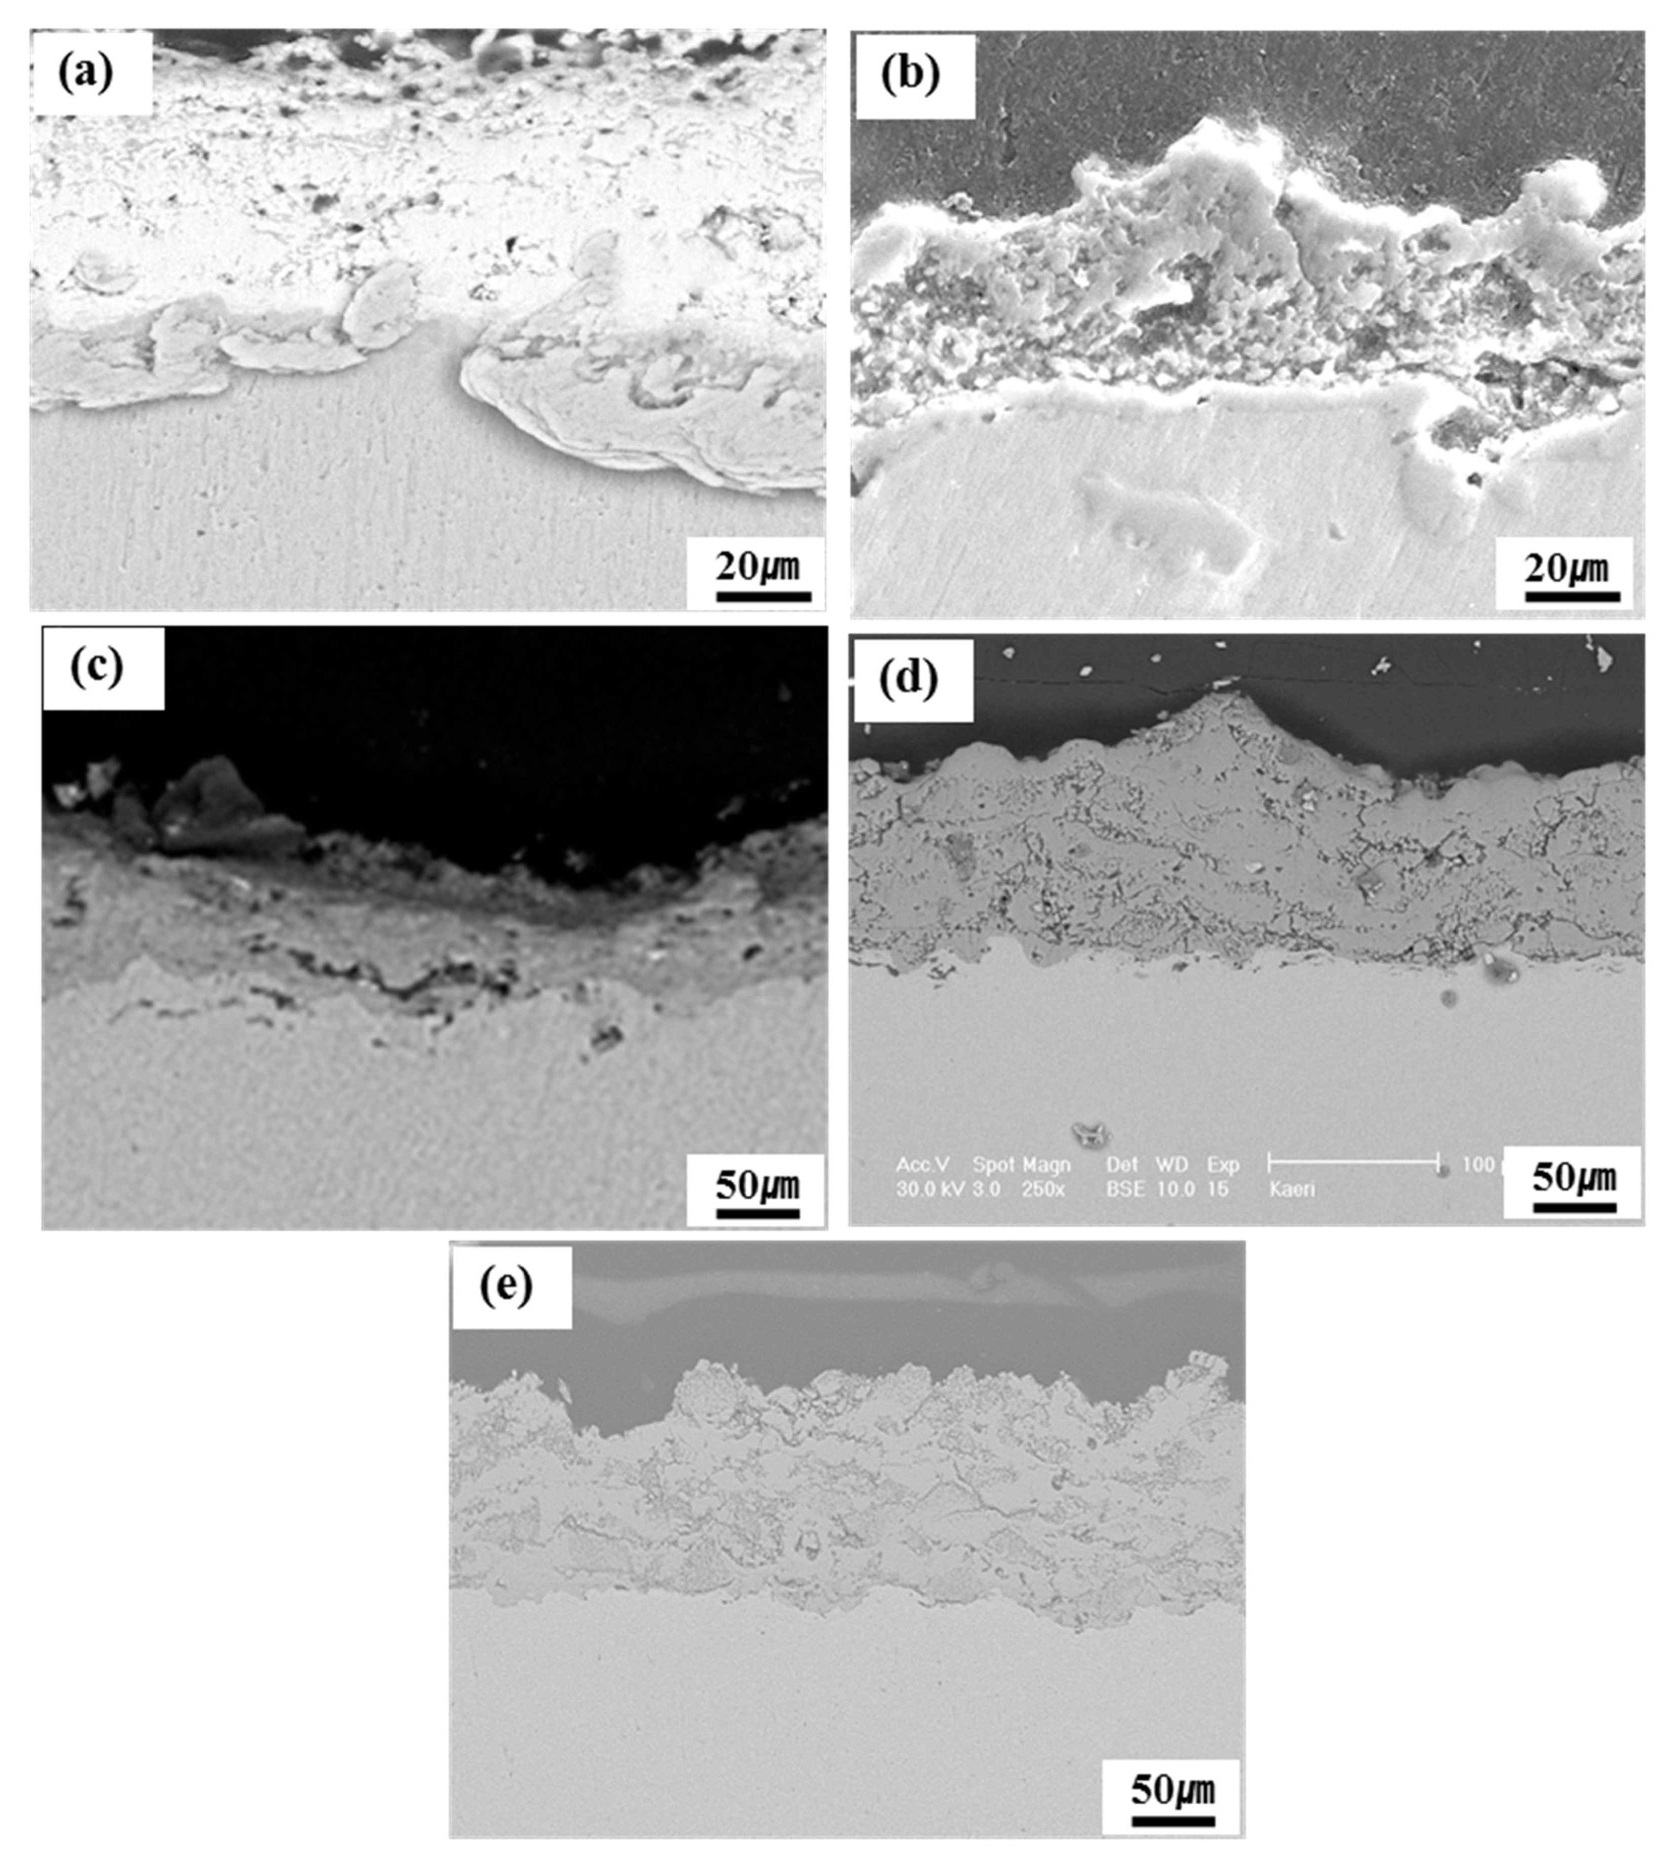 Cross-sectional SEM Micrographs showing the Ceramic Coating Layer after 5 Thermal Cycles at 1450℃ for 30 min: (a) TaC, (b) TiC, (c) ZrC, (d) ZrO2, and (e) Y2O3